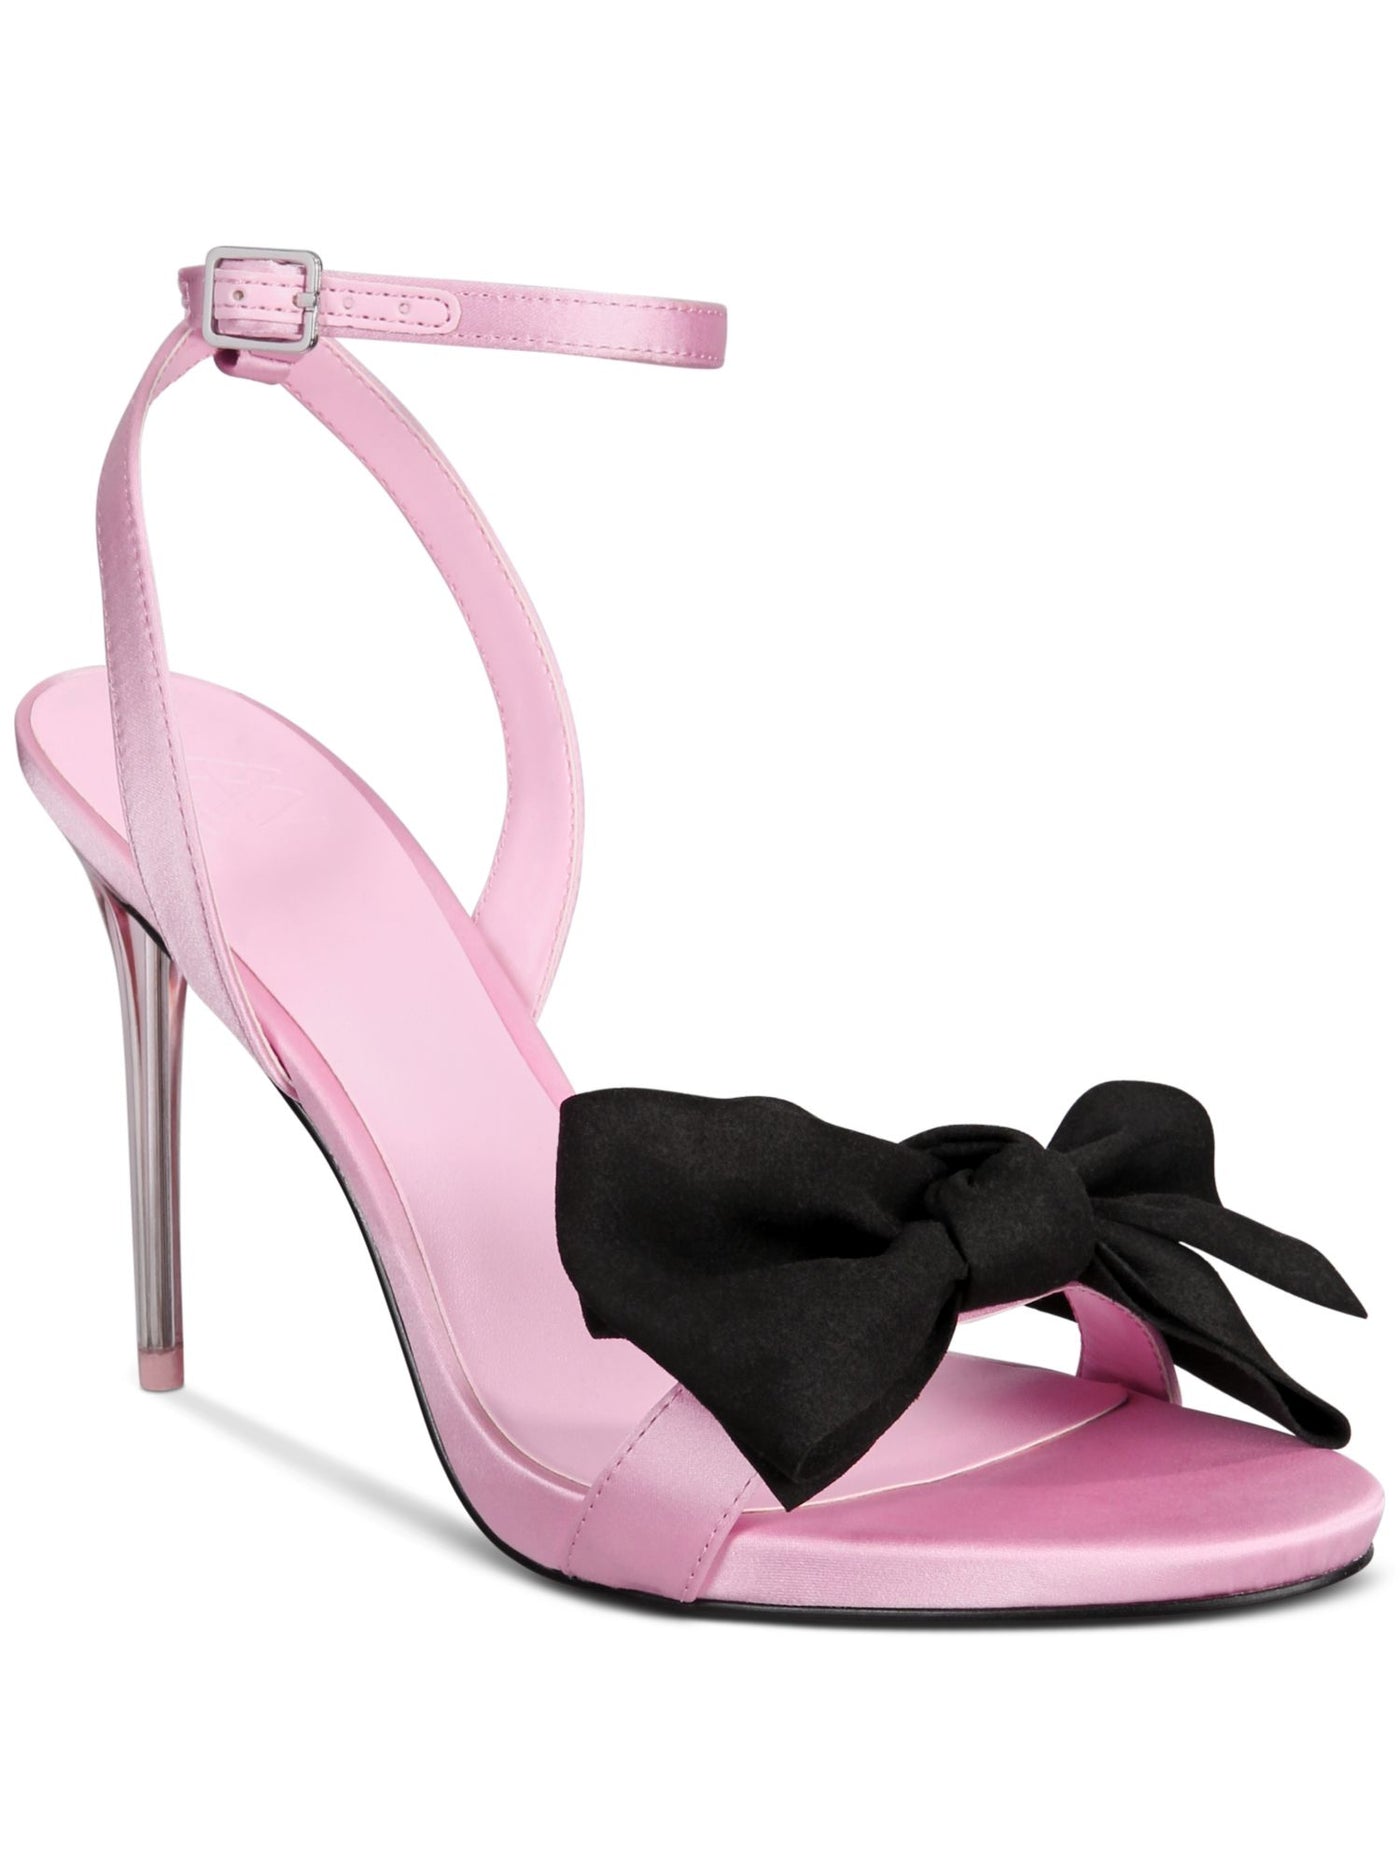 AAJ BY AMINAH Womens Pink Cushioned Bow Accent Ankle Strap Yahira Almond Toe Stiletto Buckle Dress Heeled Sandal 10 M